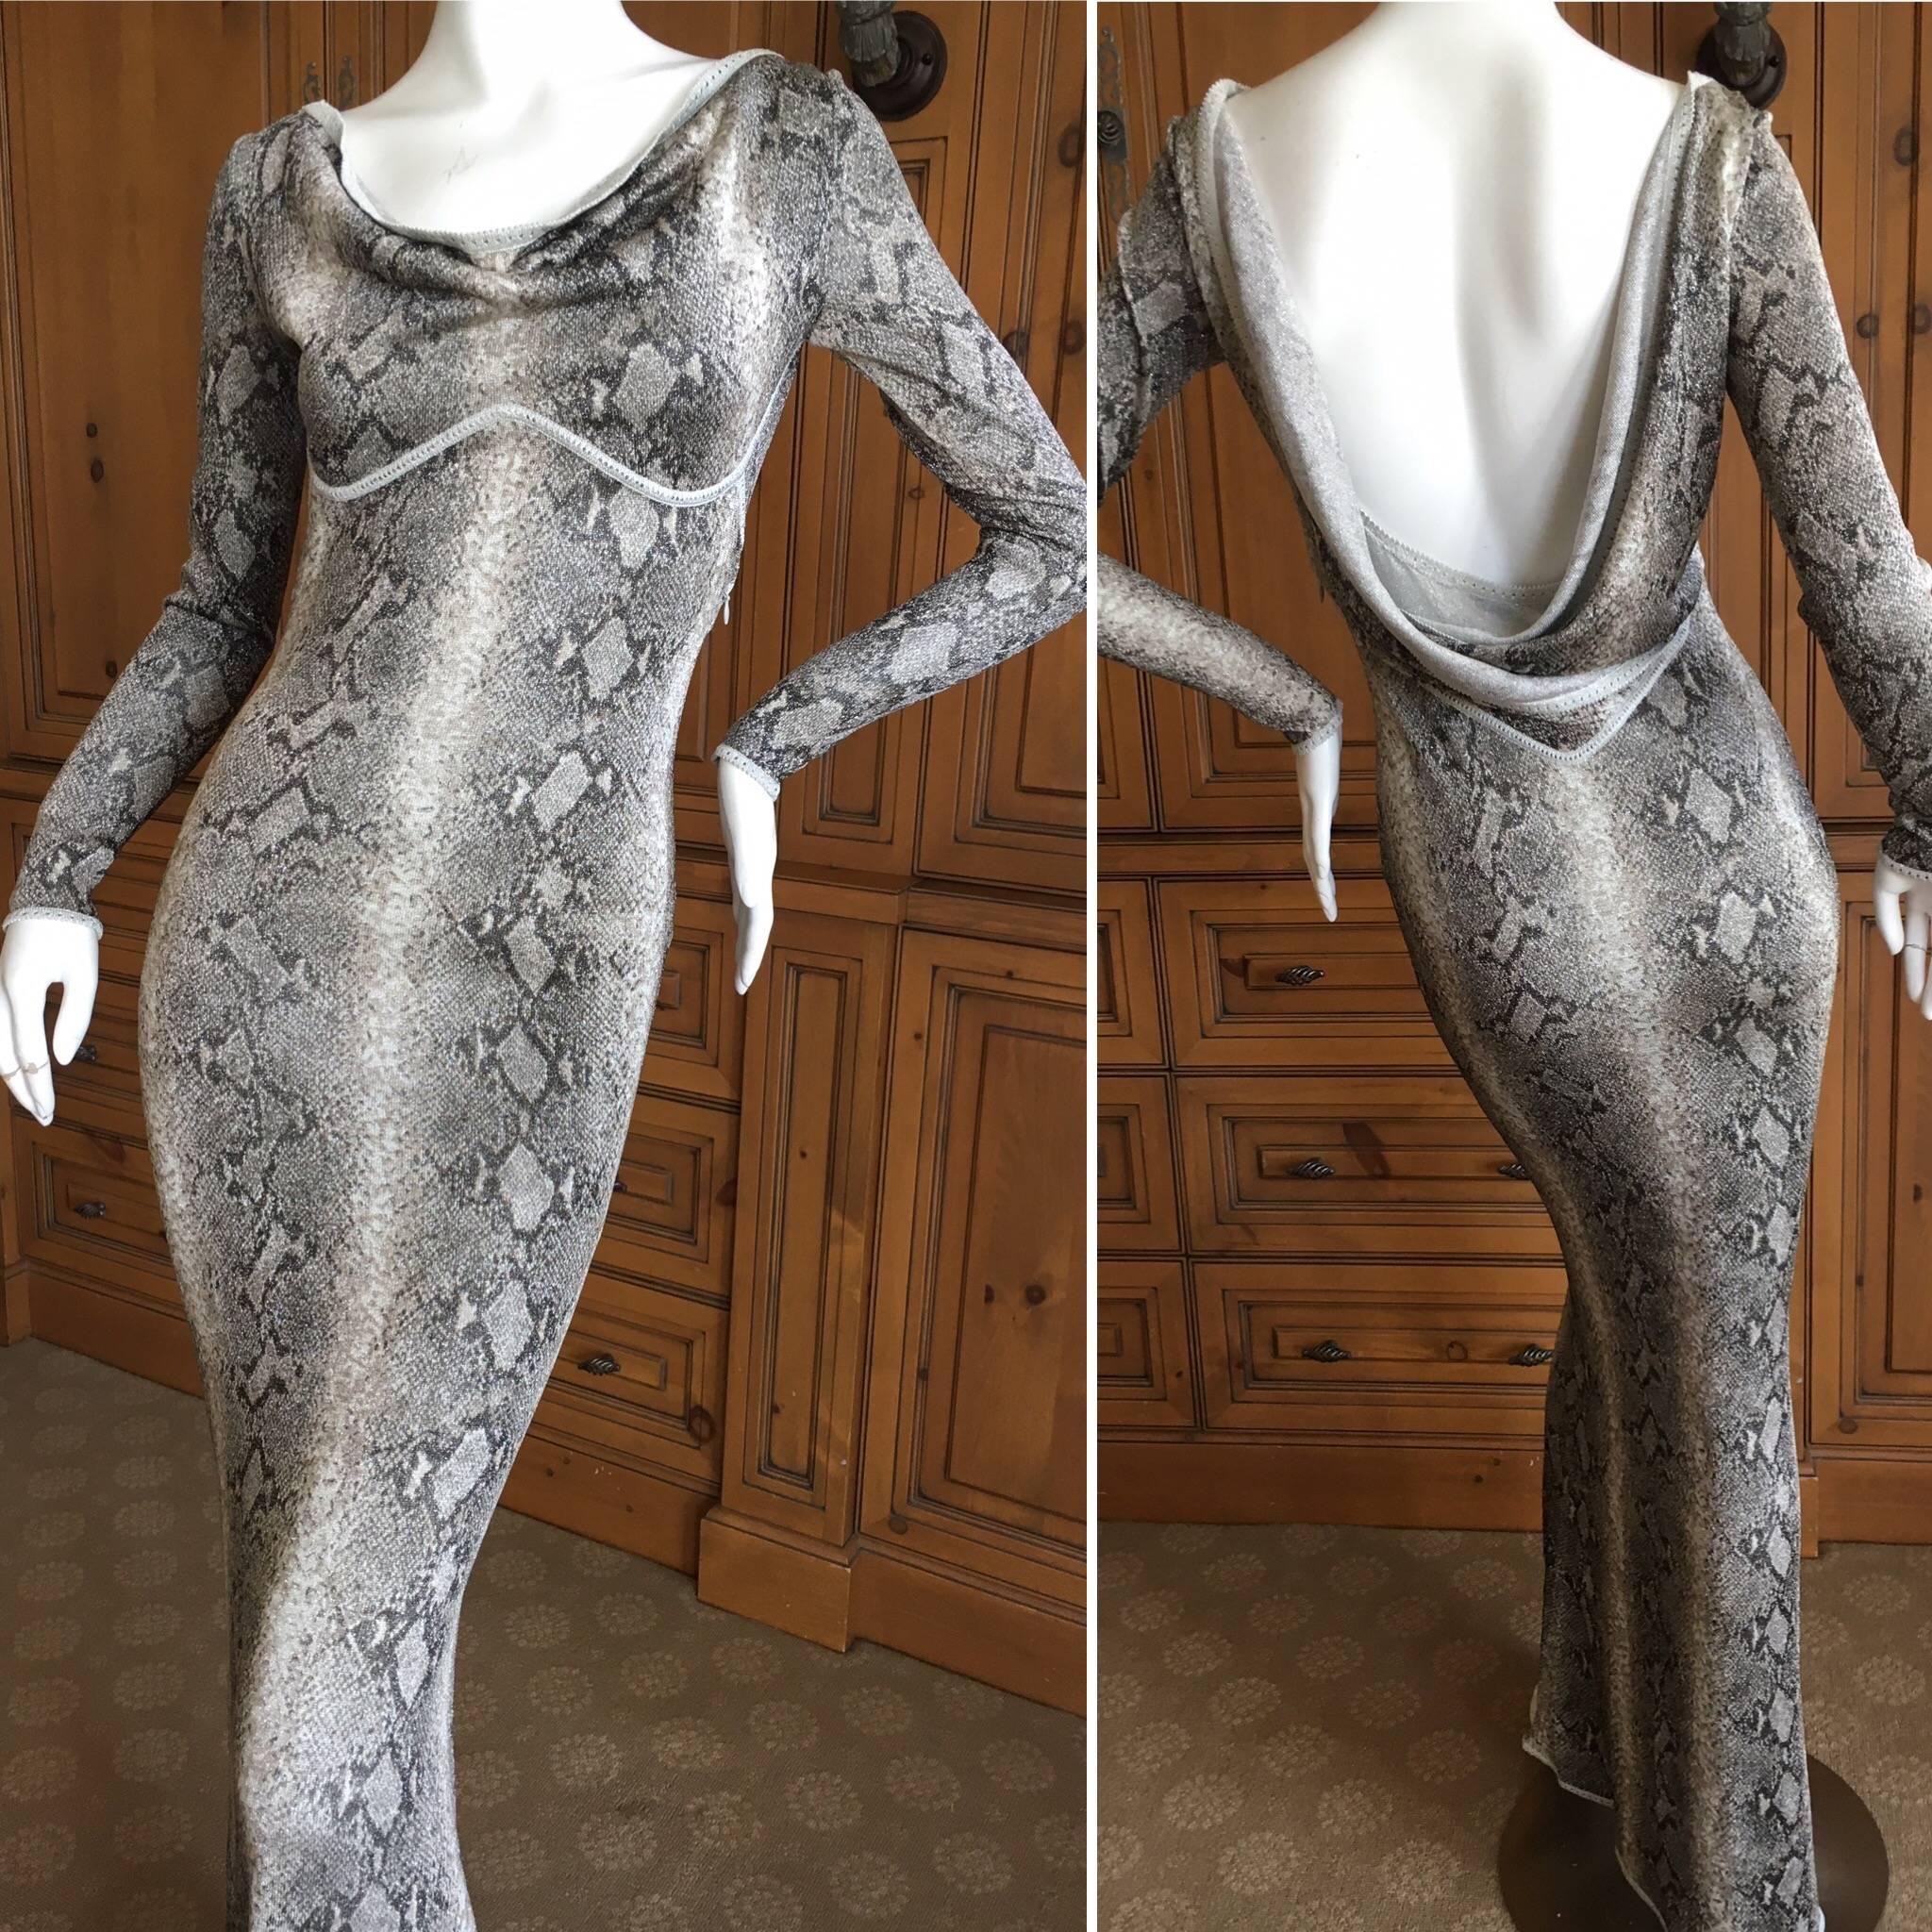 John Galliano 1997 Snake Print Scoop Back Evening Dress.
Stunning evening dress with one of the earlier Galliano label's, from 1997.
Low Scoop back, the photos don't capture the metallic threads in the fabric, this is much prettier in